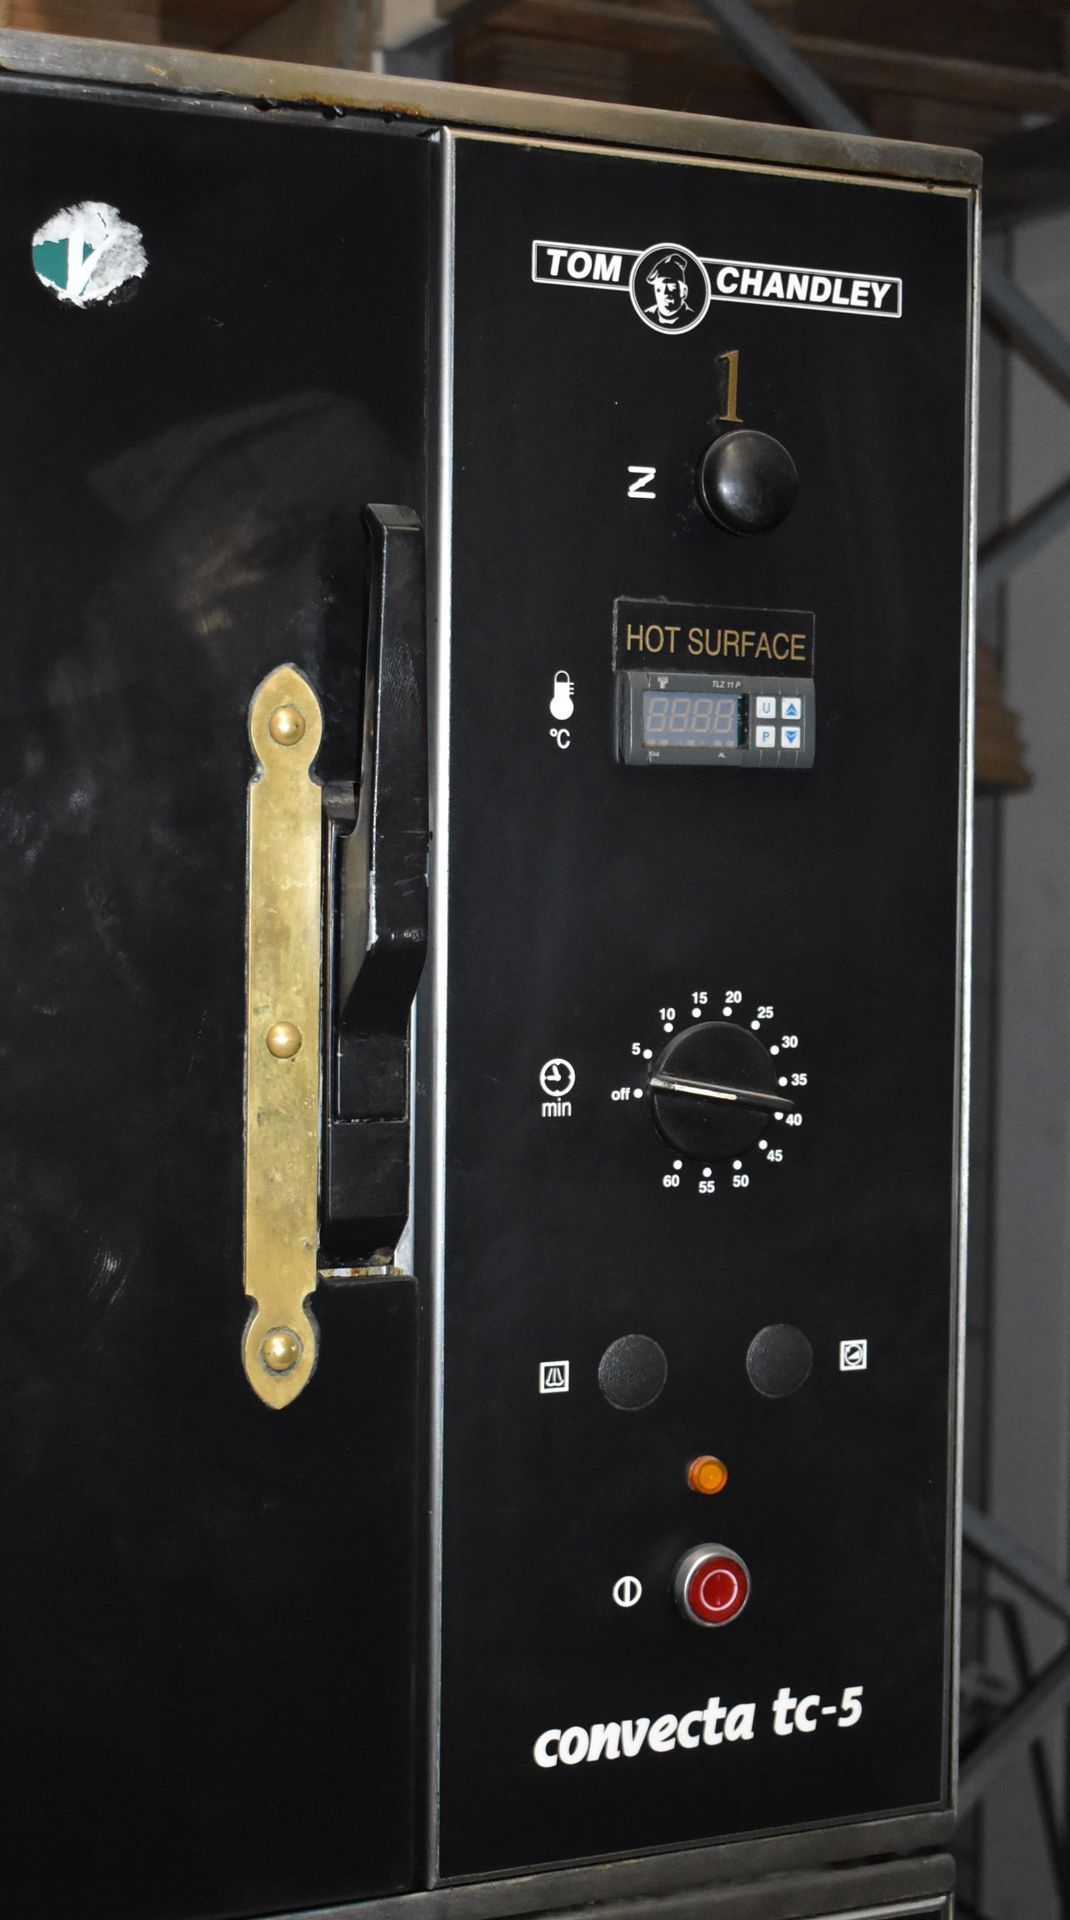 1 x Tom Chandley Double Door Bakey Oven - 3 Phase - Model TC53018 - Removed From Well Known - Image 5 of 8